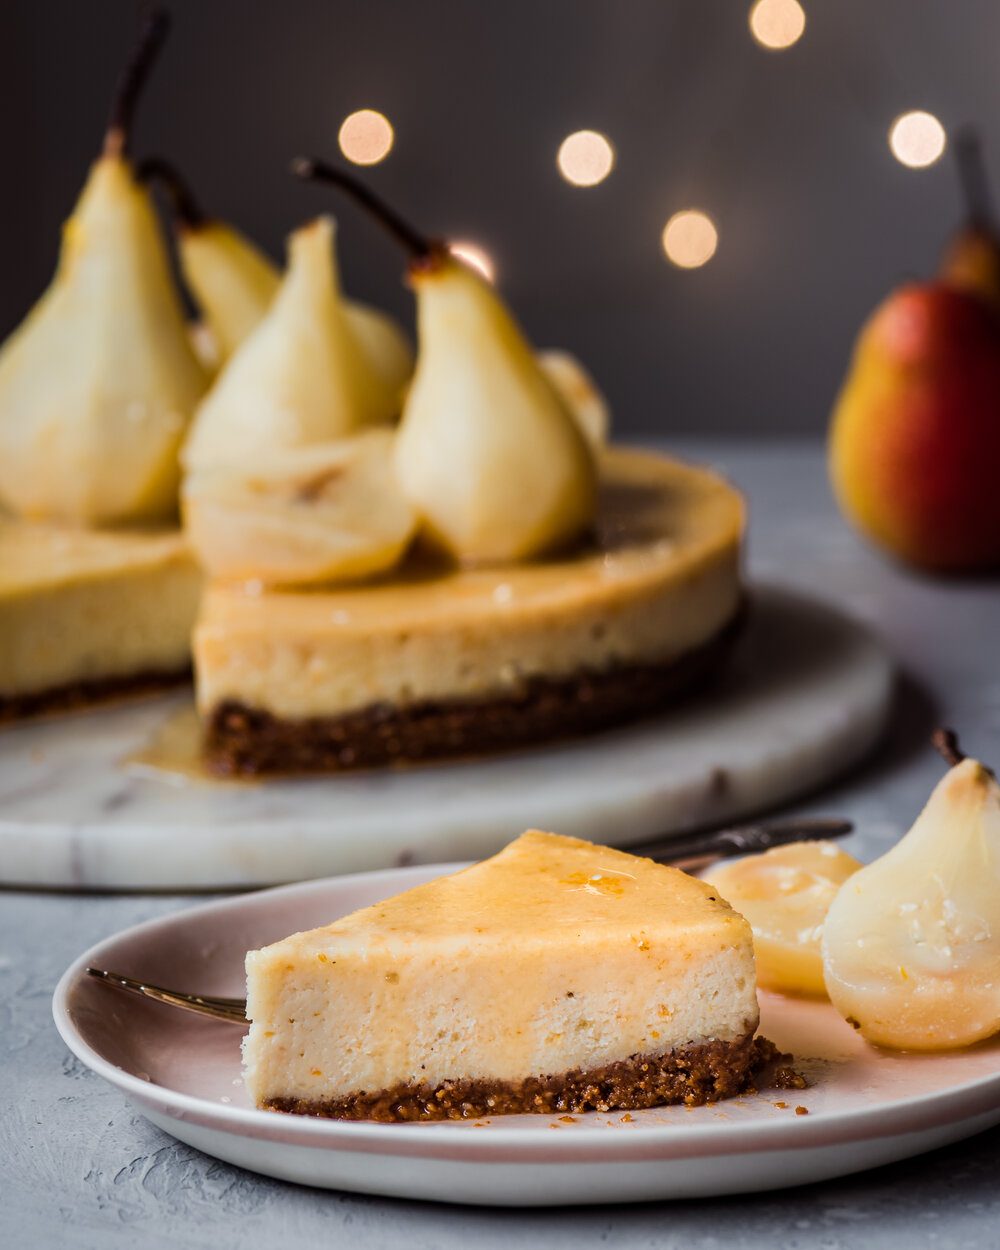 One piece of cheesecake and two poached pear halves on a plate with a fork.